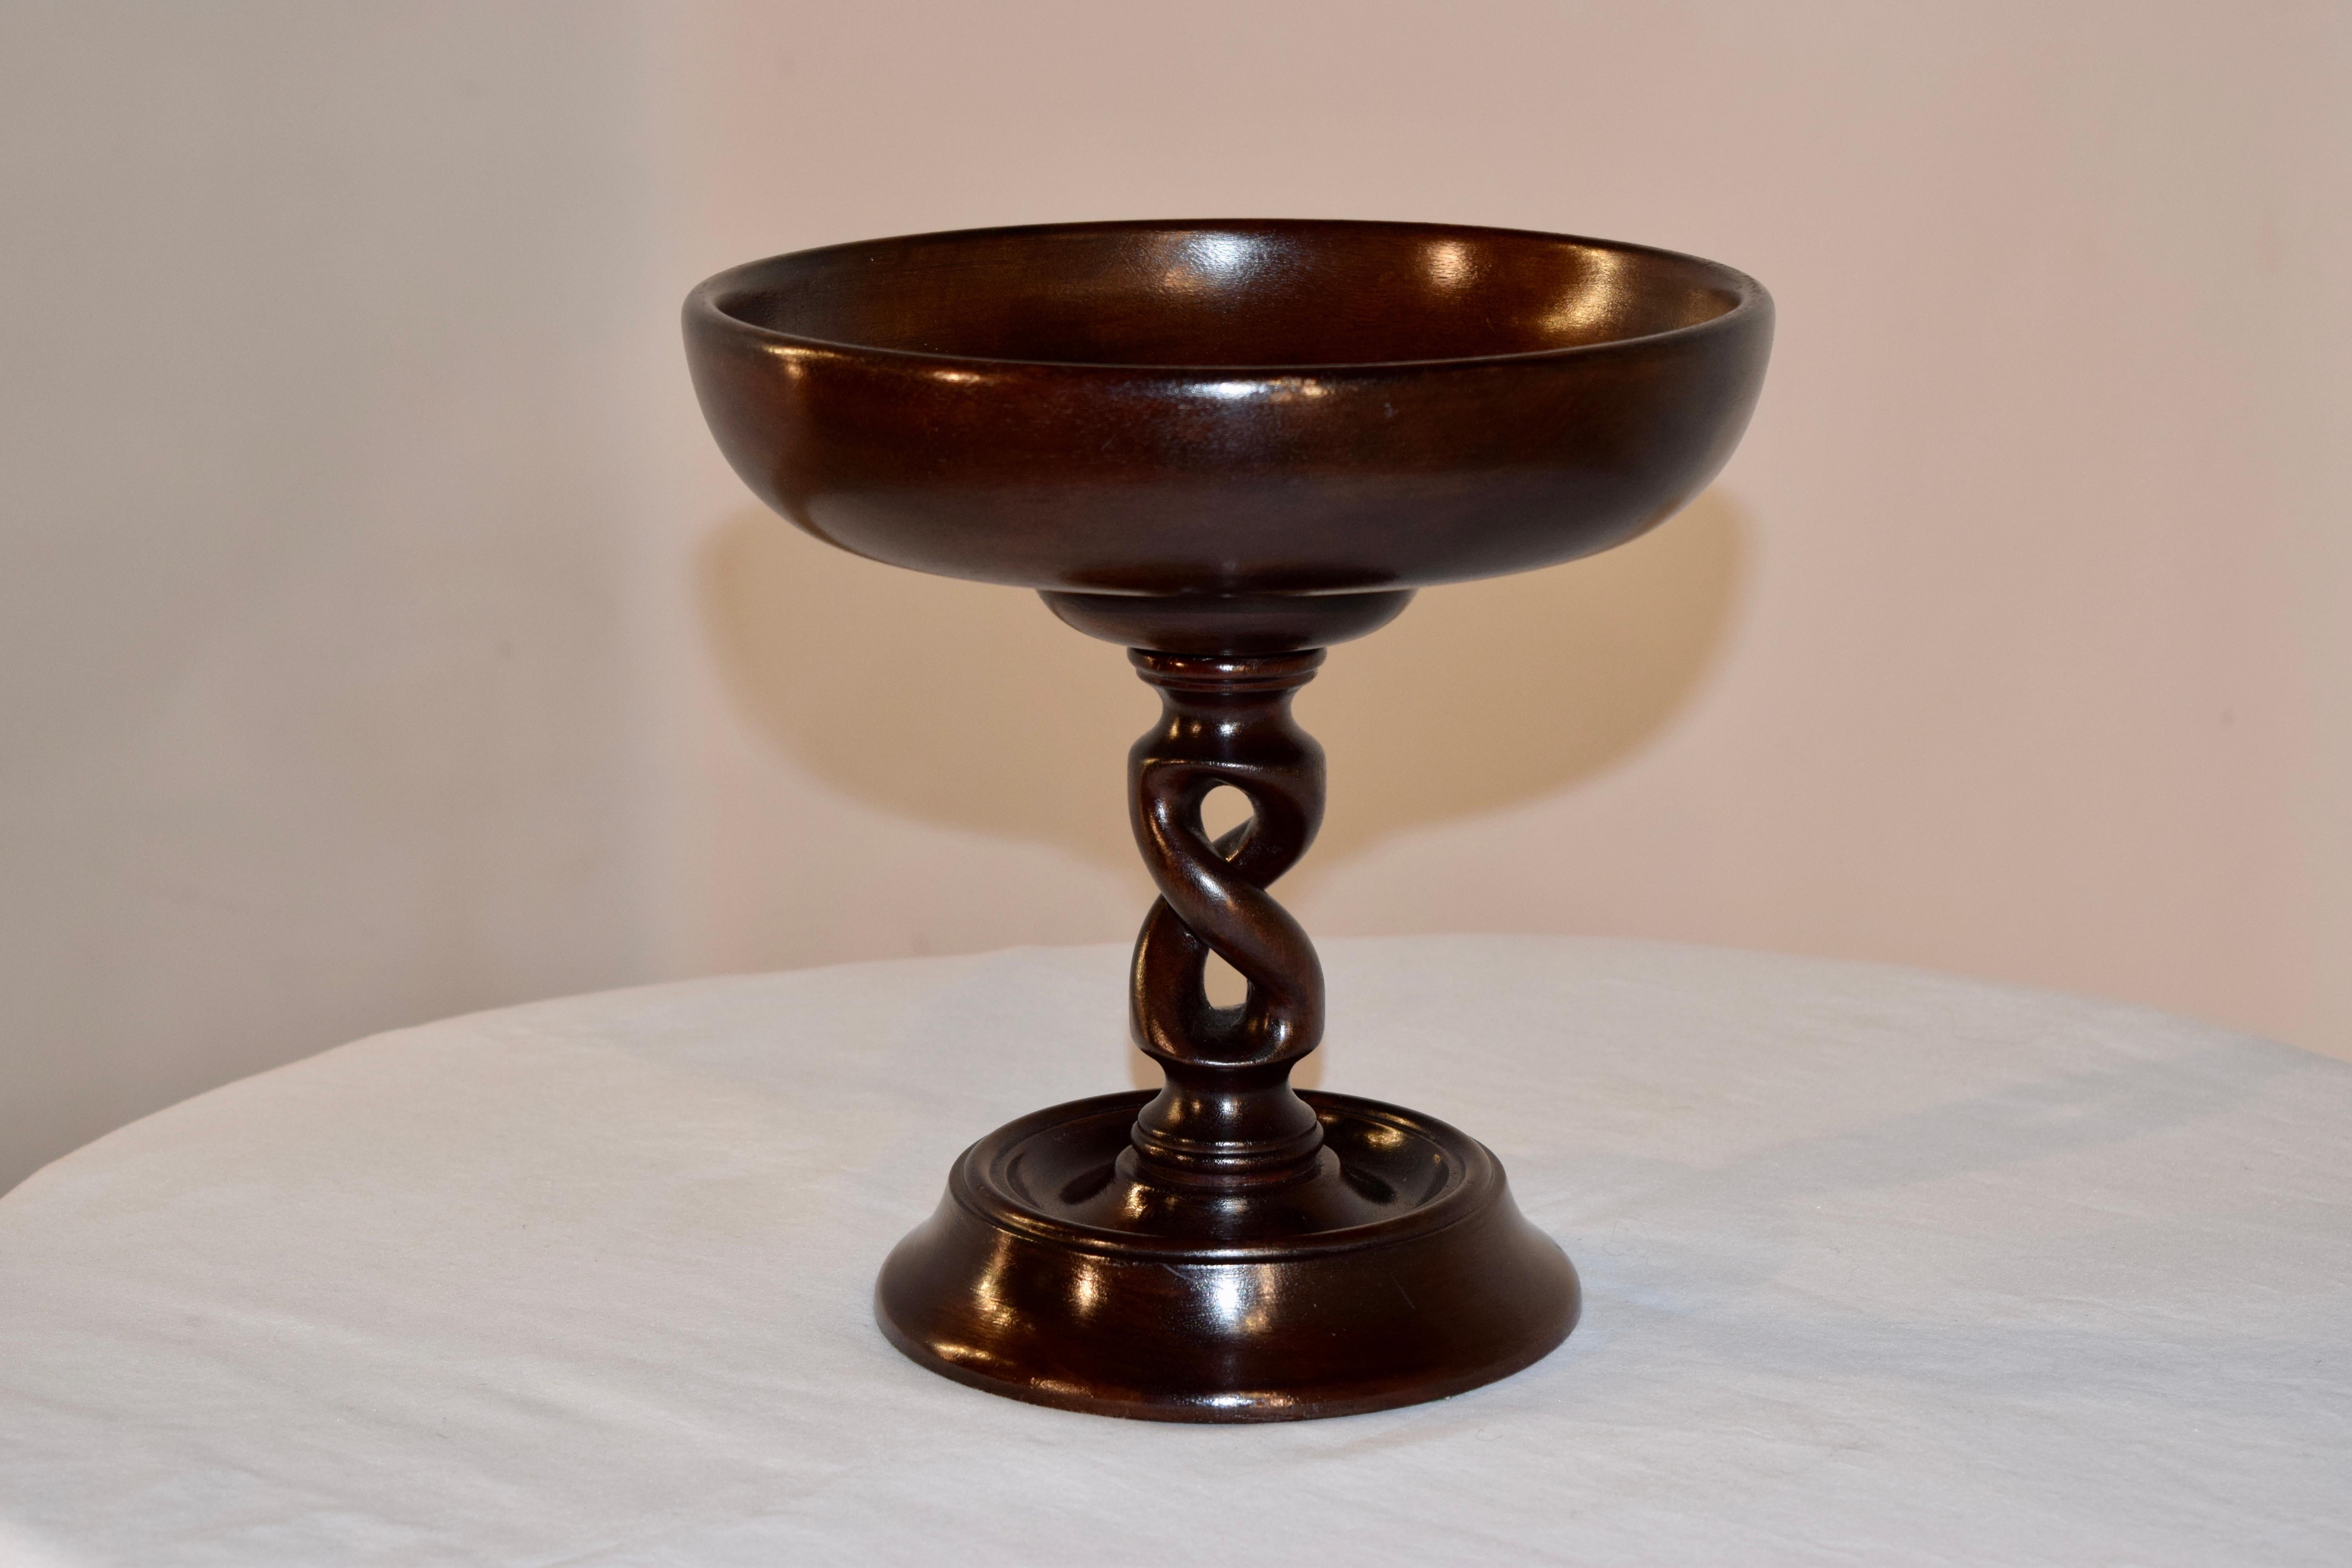 19th century tall oak compote from England with a nicely hand-turned bowl supported on a hand-turned open barley twist column and hand-turned base.